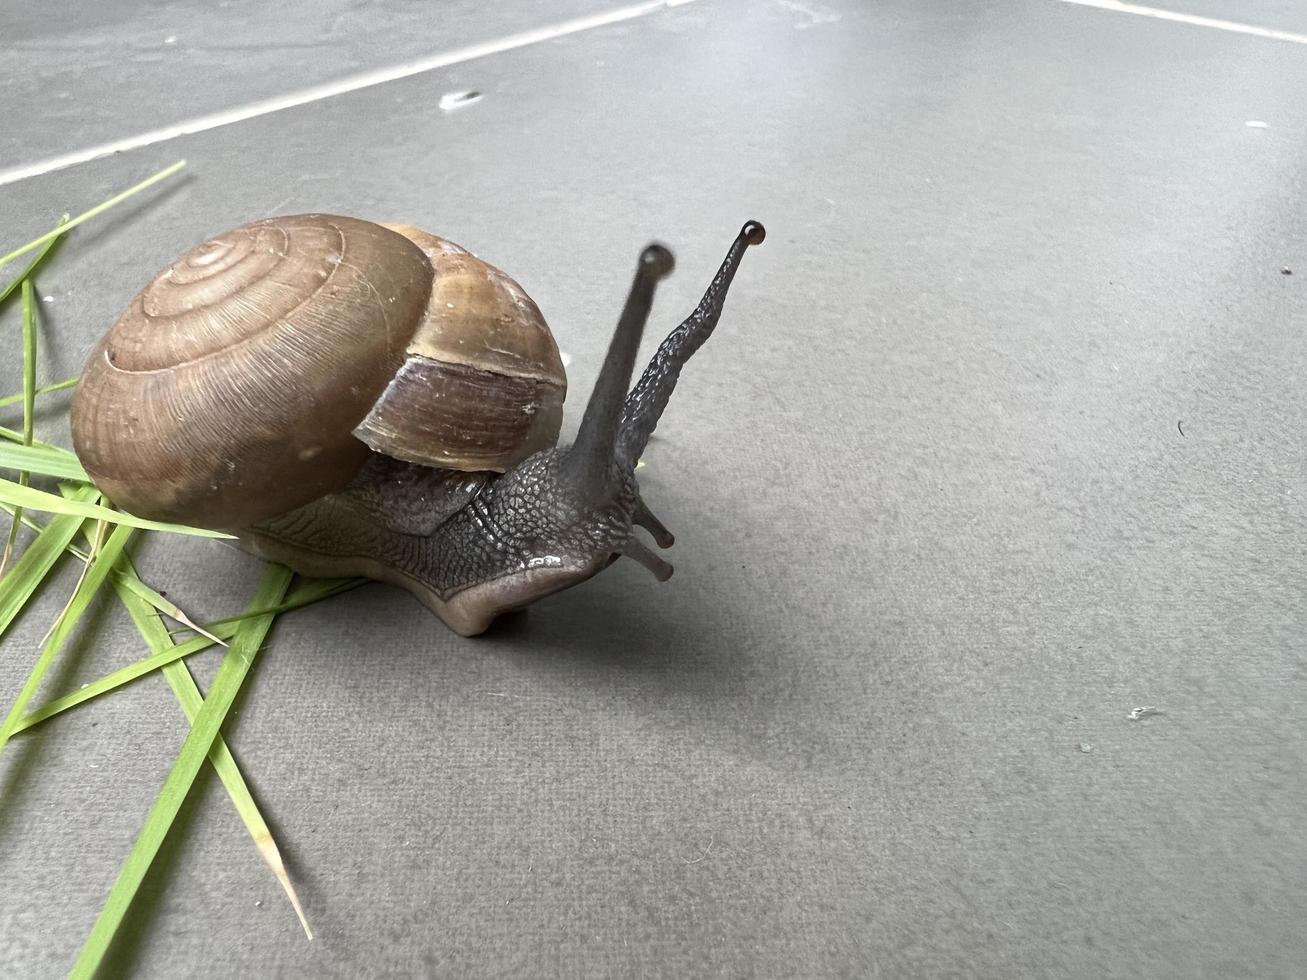 Close-up photo of snail shell, light brown snail walking, snail with long tentacles and eyes, on a gray background walking near green grass.